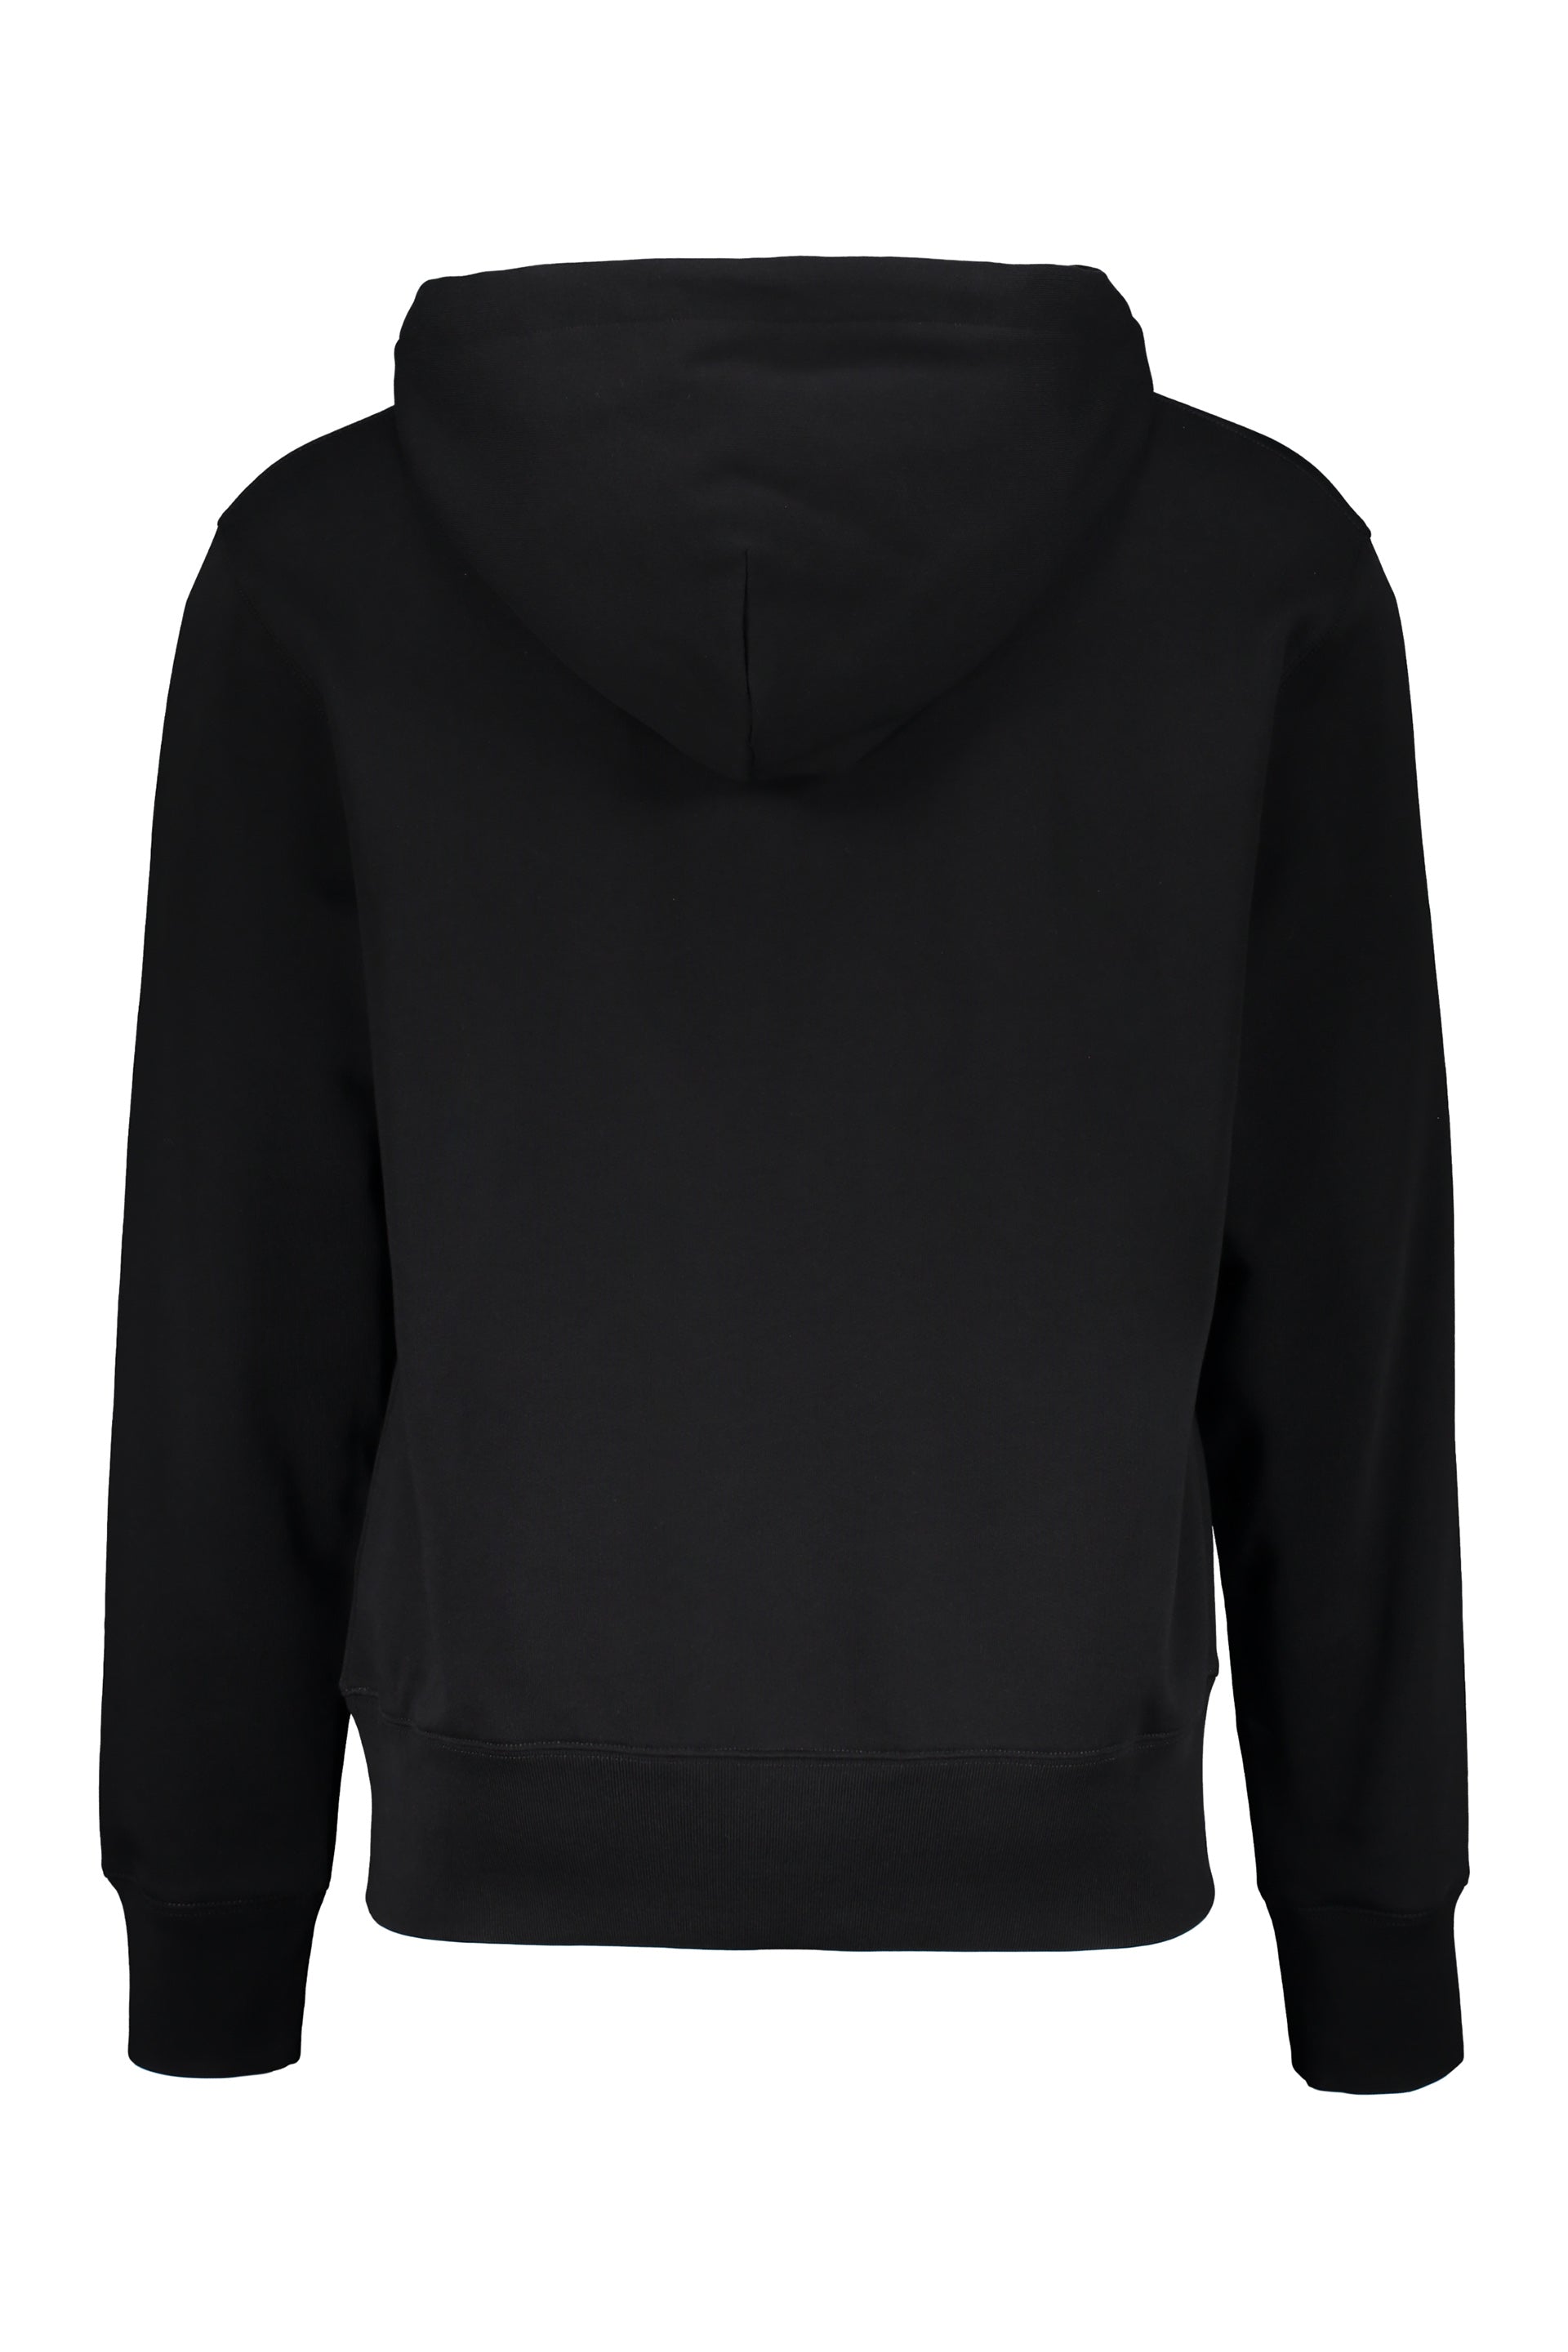 Acne-Studios-OUTLET-SALE-Hooded-sweatshirt-Strick-ARCHIVE-COLLECTION-2.jpg